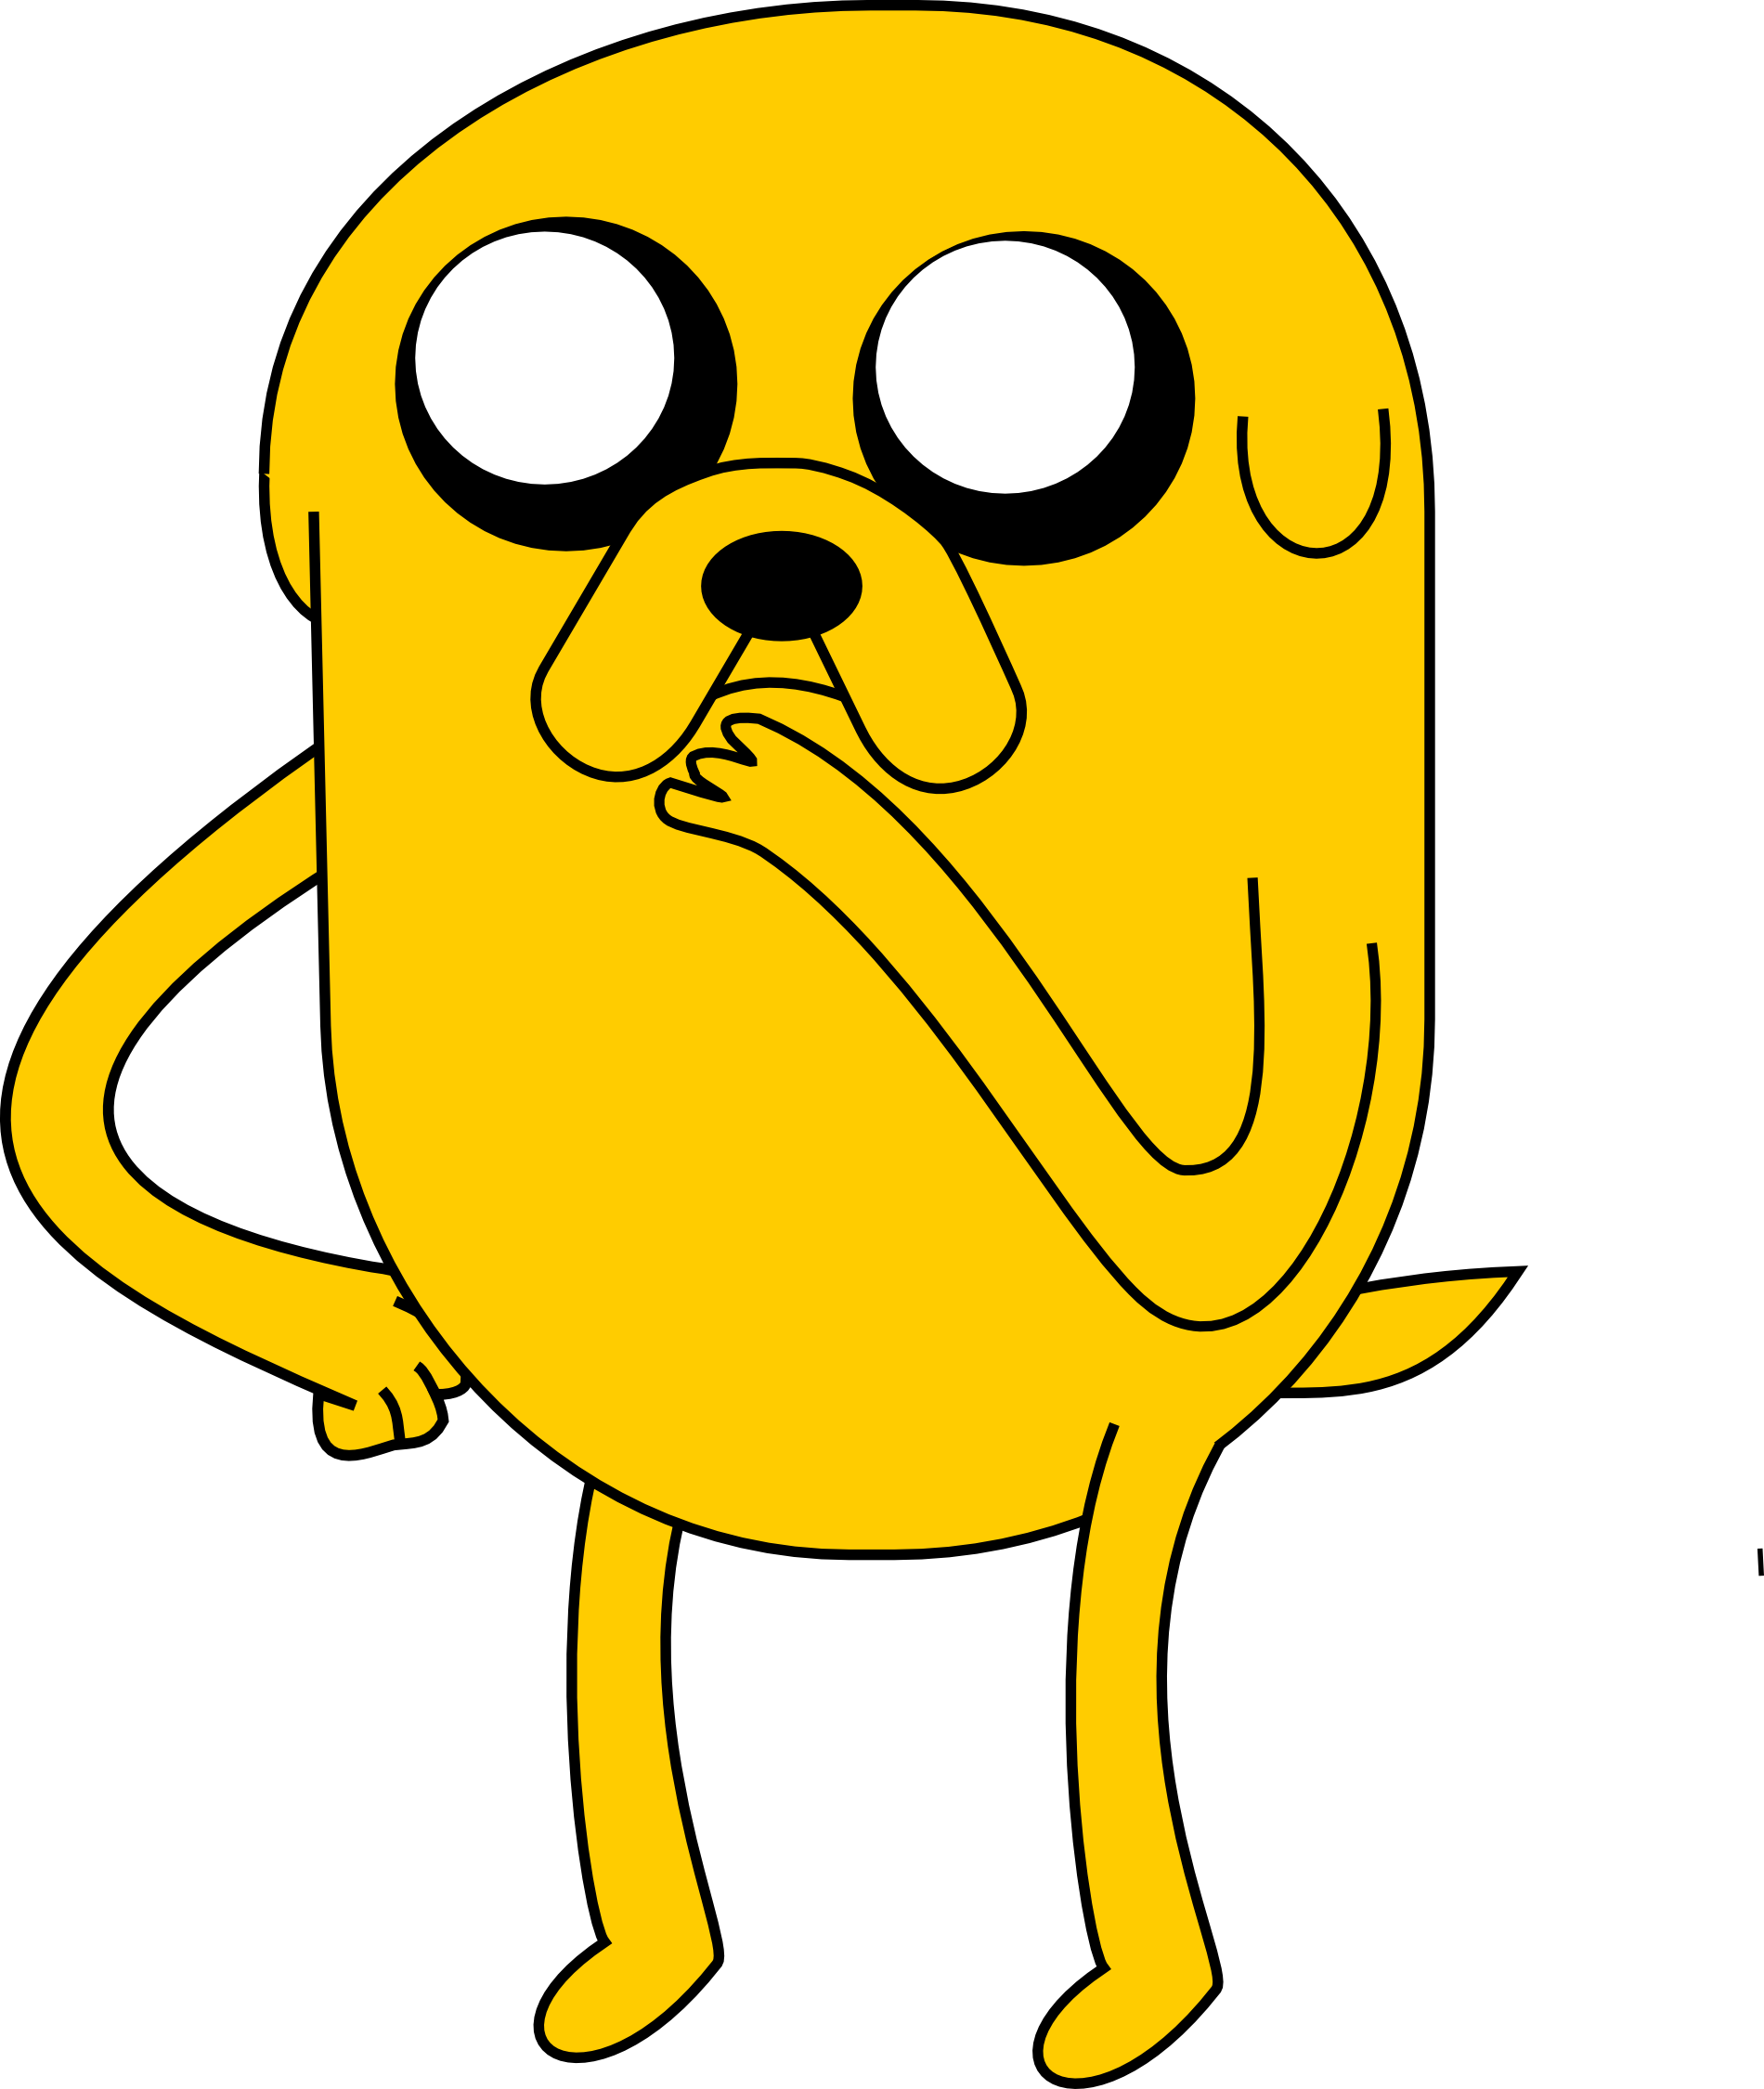 Adventure Time Jake - ClipArt Best